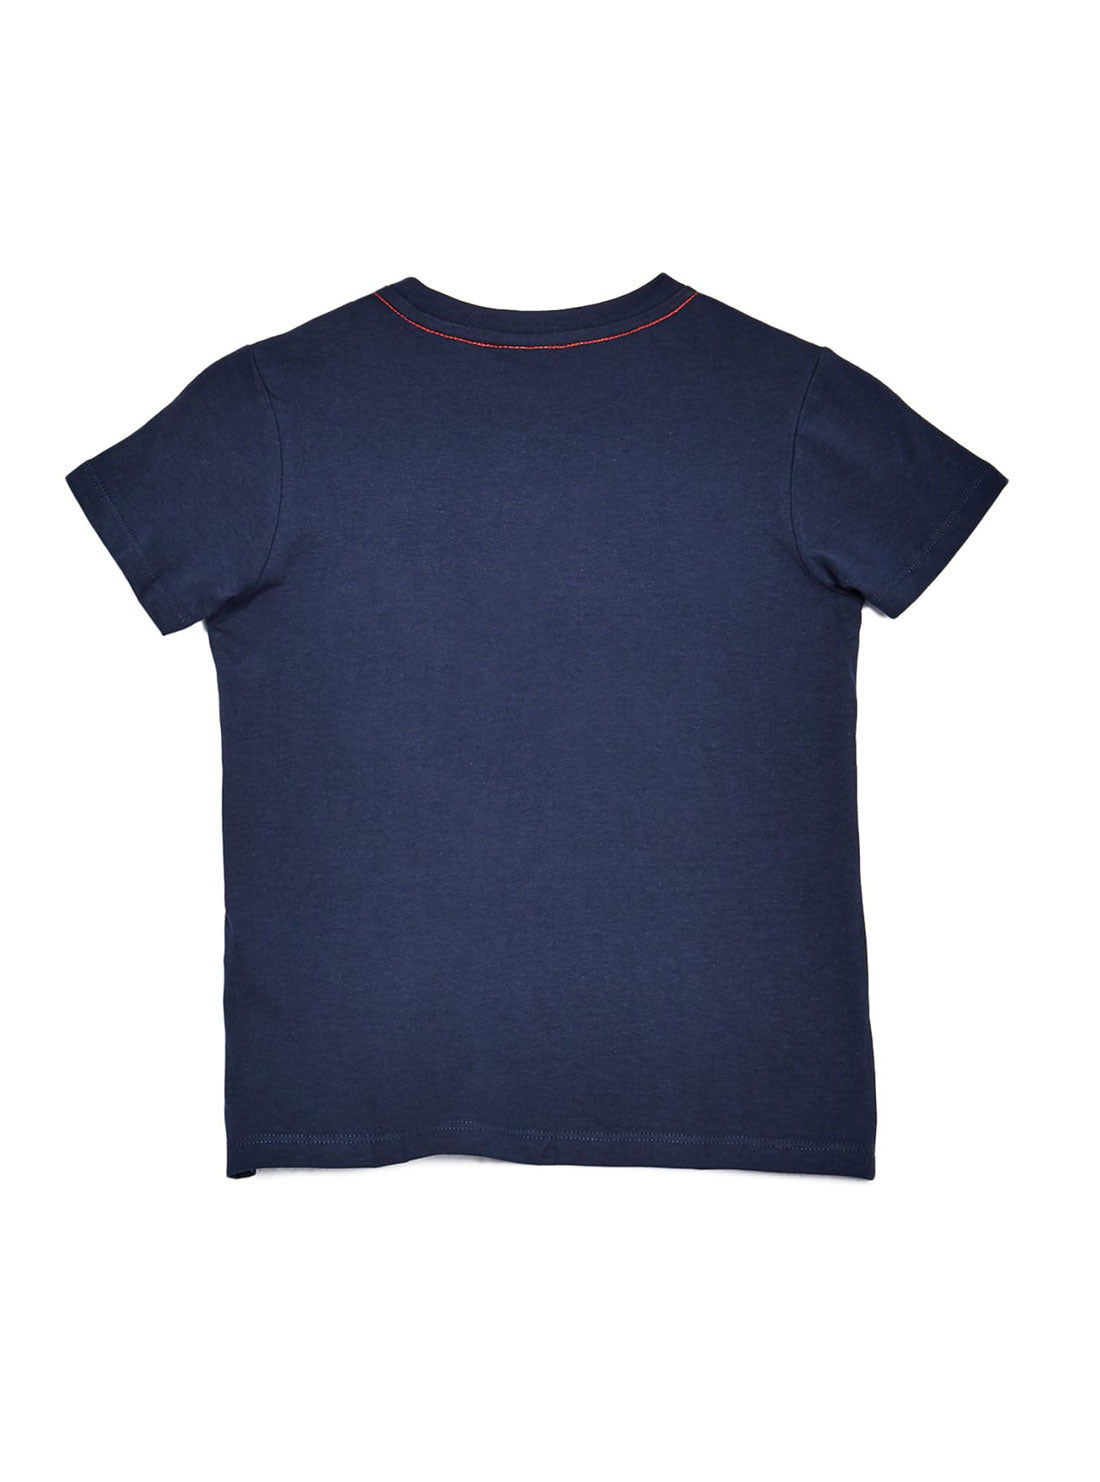 GUESS Little Boys Navy Blue Short Sleeve Triangle Logo Tee (2-7)  N73I55K5M20 Back View